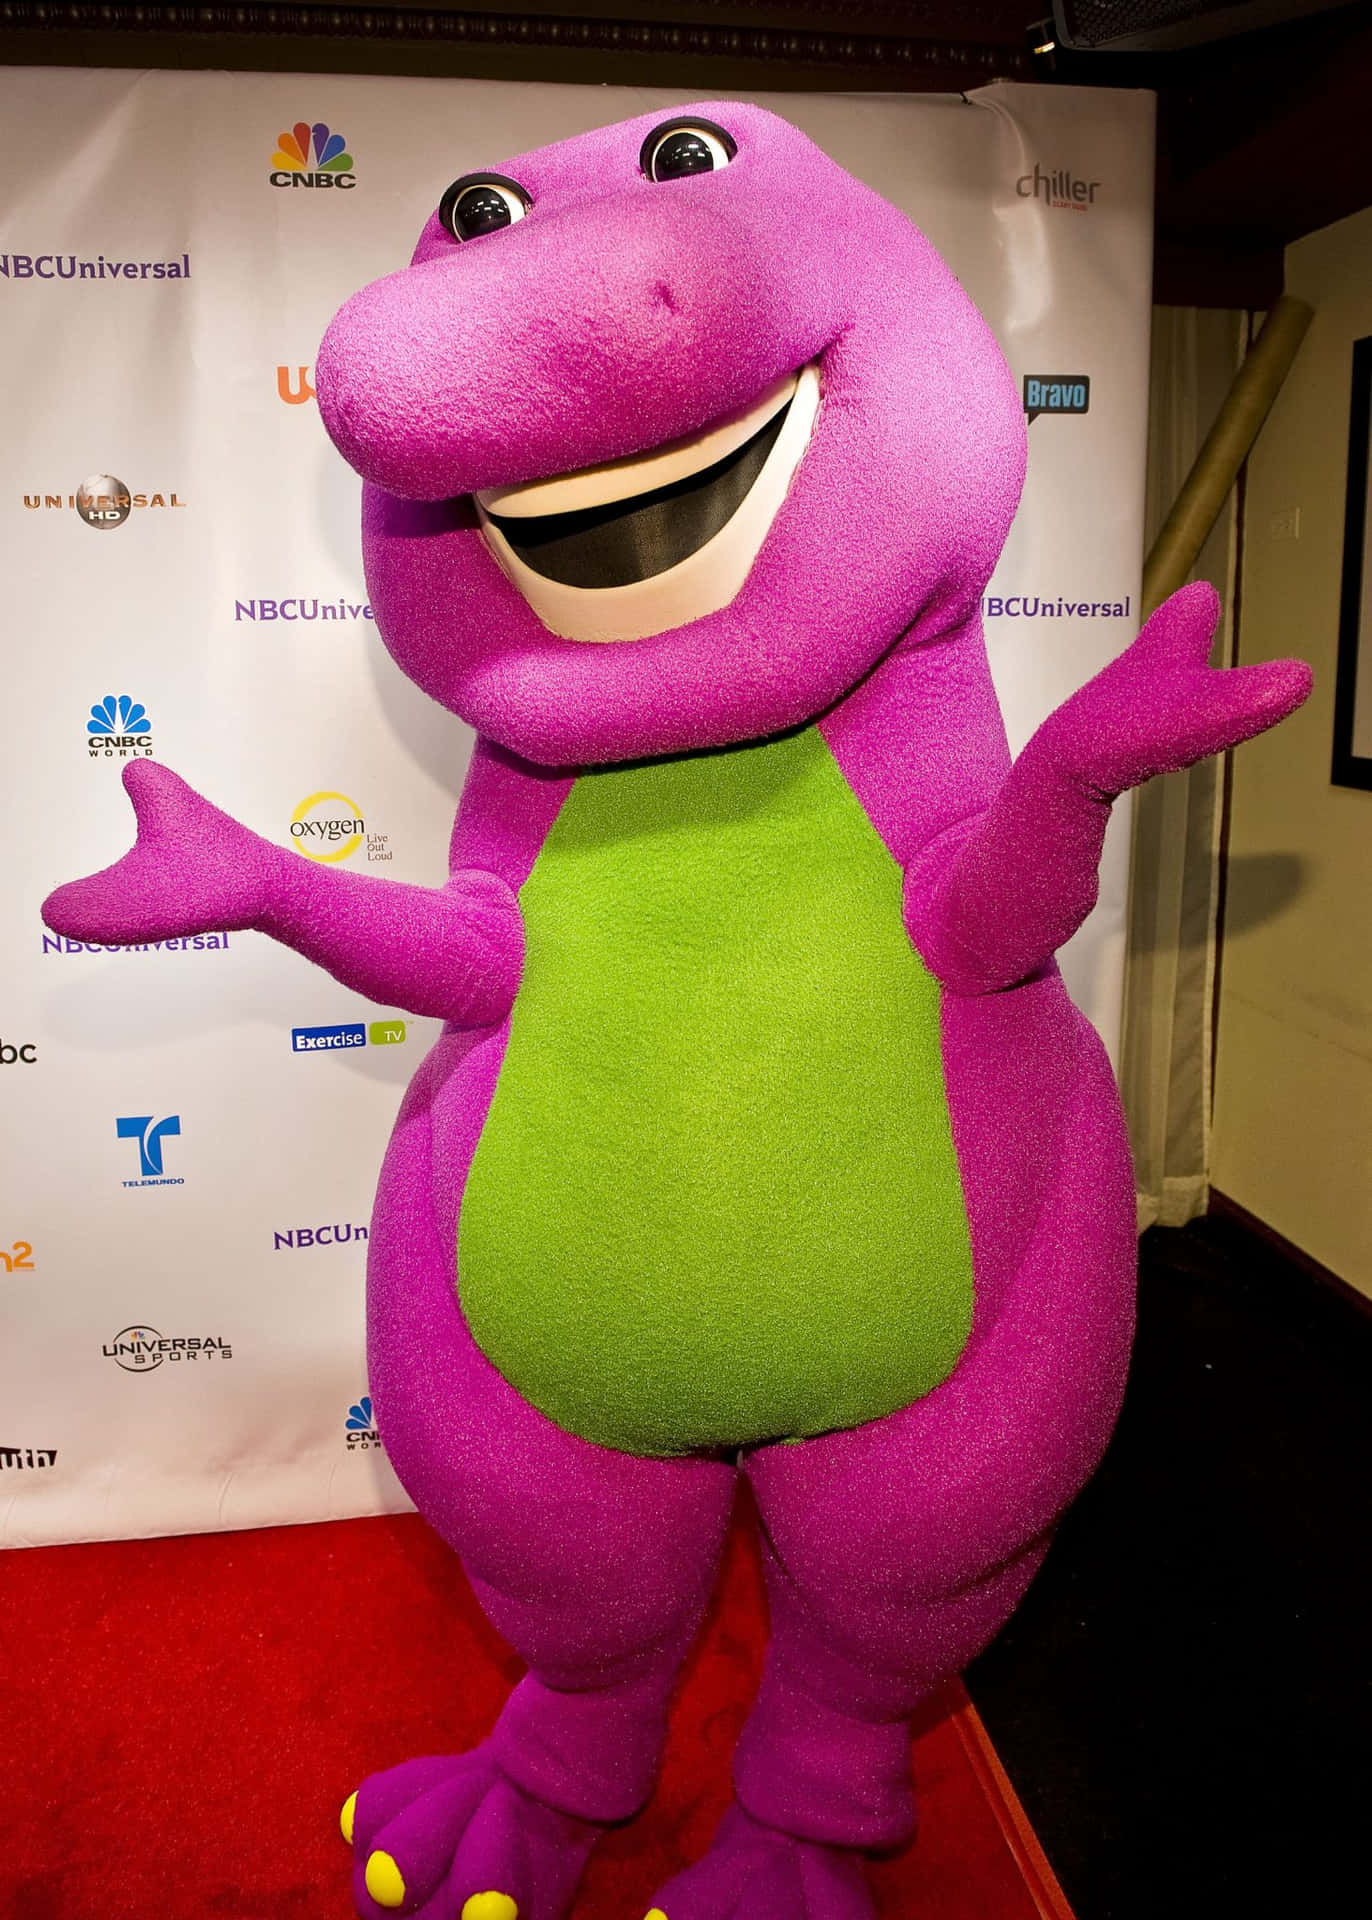 "Clap your hands with Barney!"